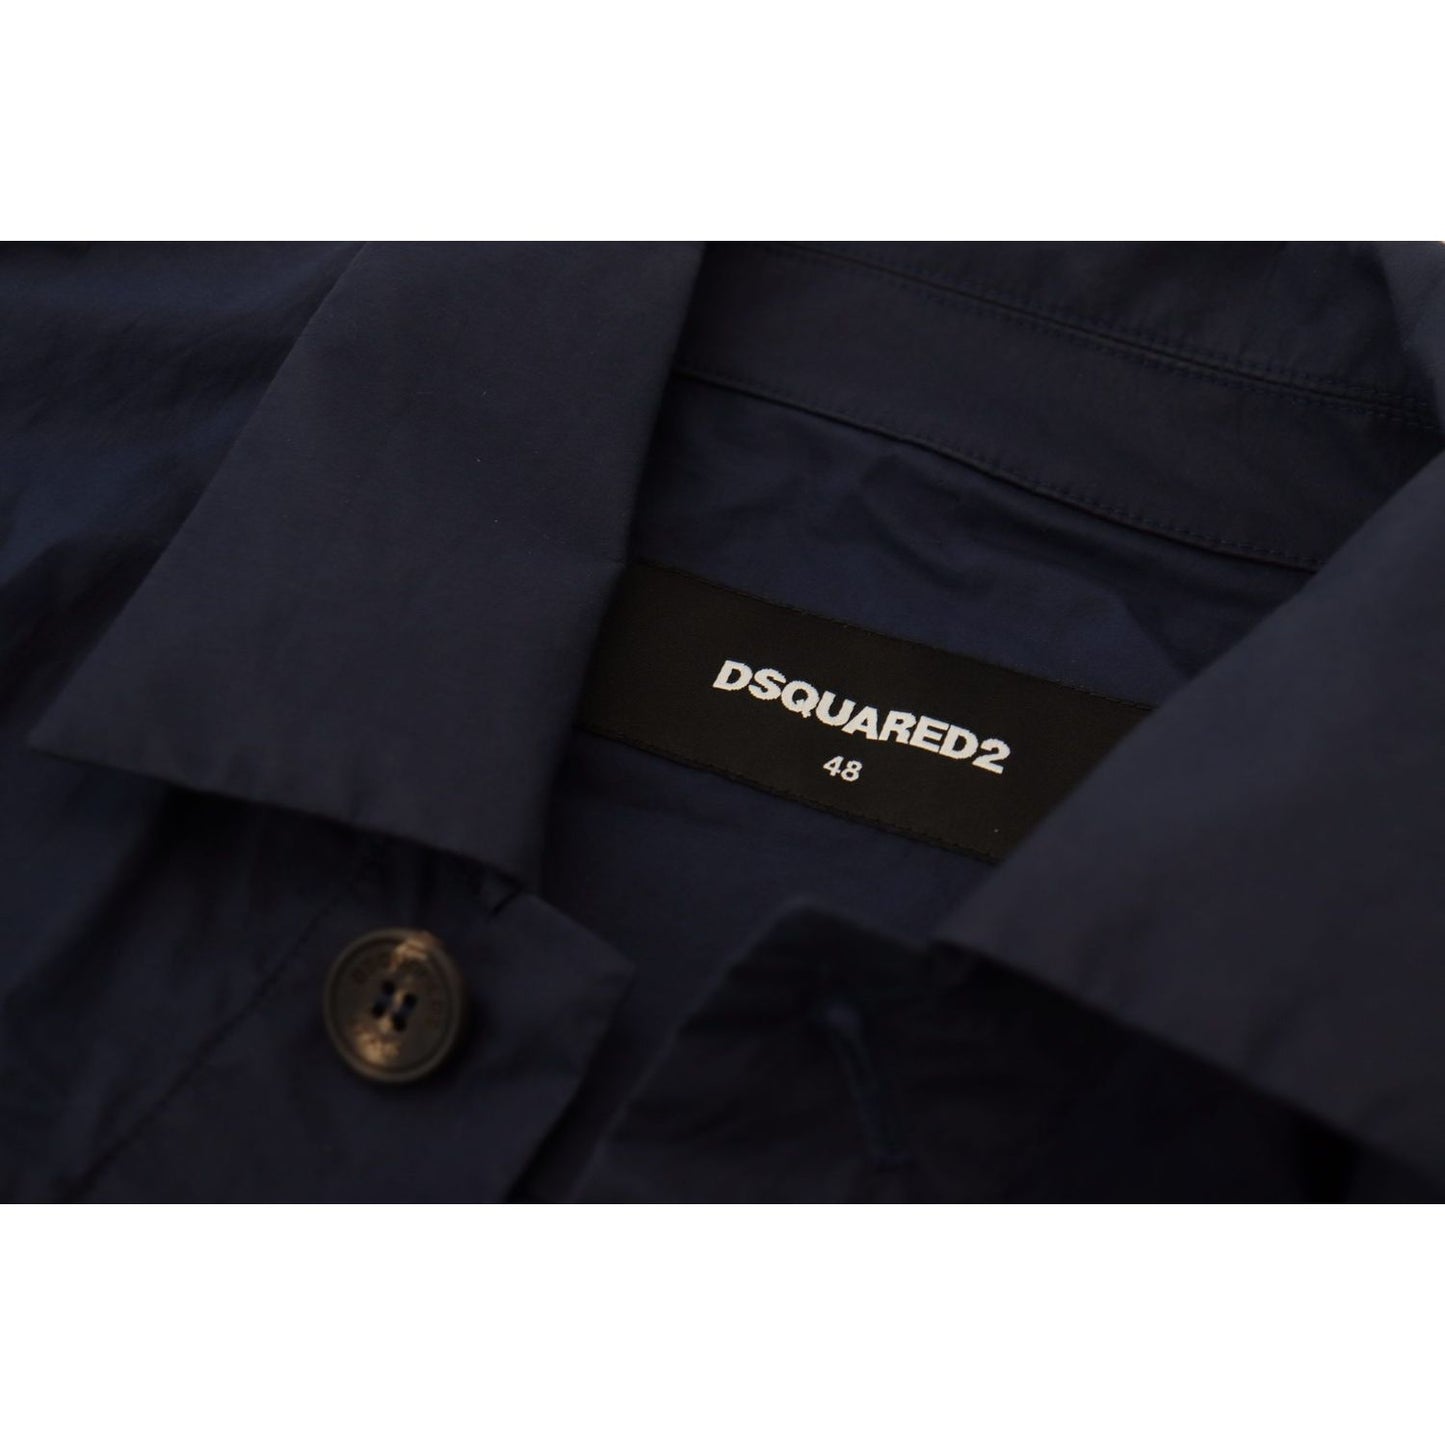 Dsquared² Svelte Dark Blue Cotton Shirt dark-blue-cotton-collared-long-sleeves-casual-shirt IMG_7212-scaled-7bc7a7a2-ffd.jpg